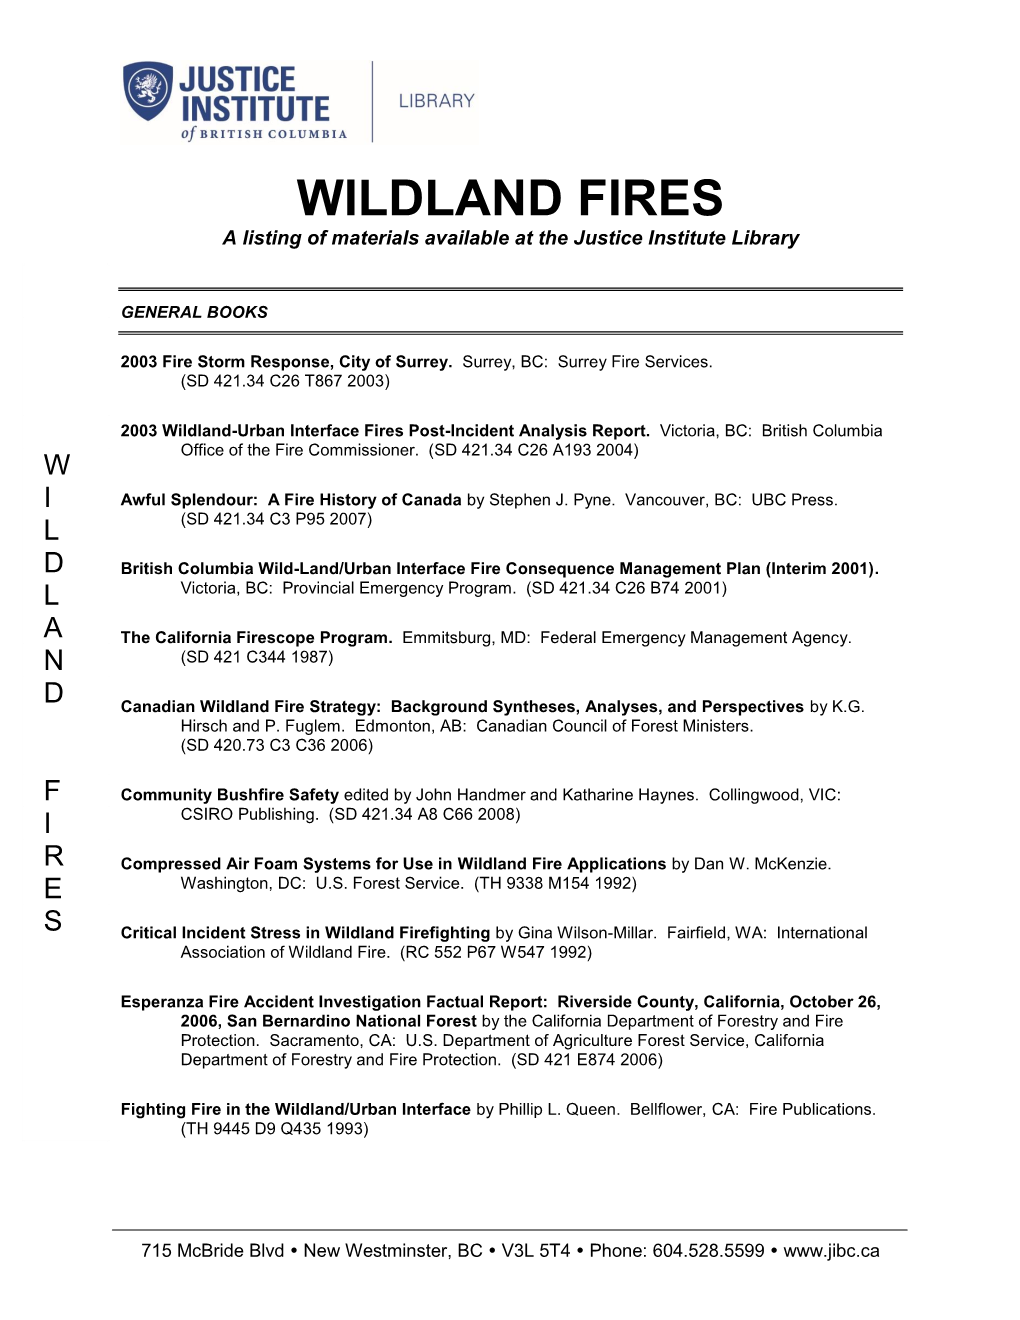 WILDLAND FIRES a Listing of Materials Available at the Justice Institute Library